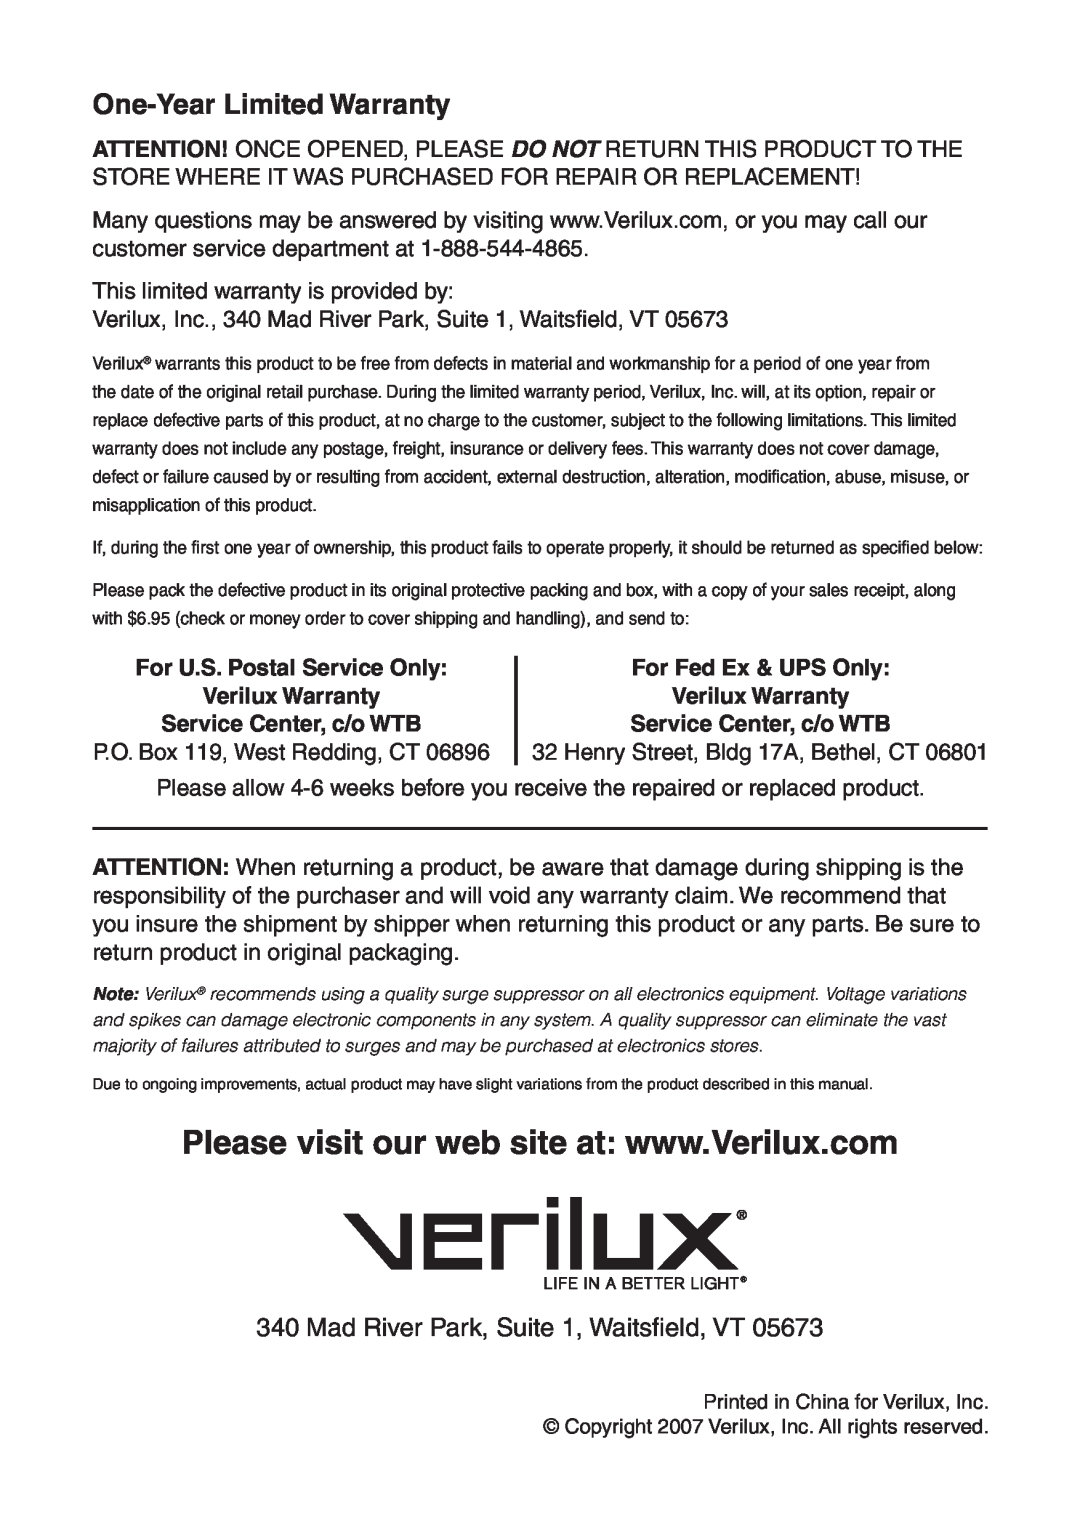 Verilux VD05 manual One-YearLimited Warranty, Mad River Park, Suite 1, Waitsﬁeld, VT, Service Center, c/o WTB 